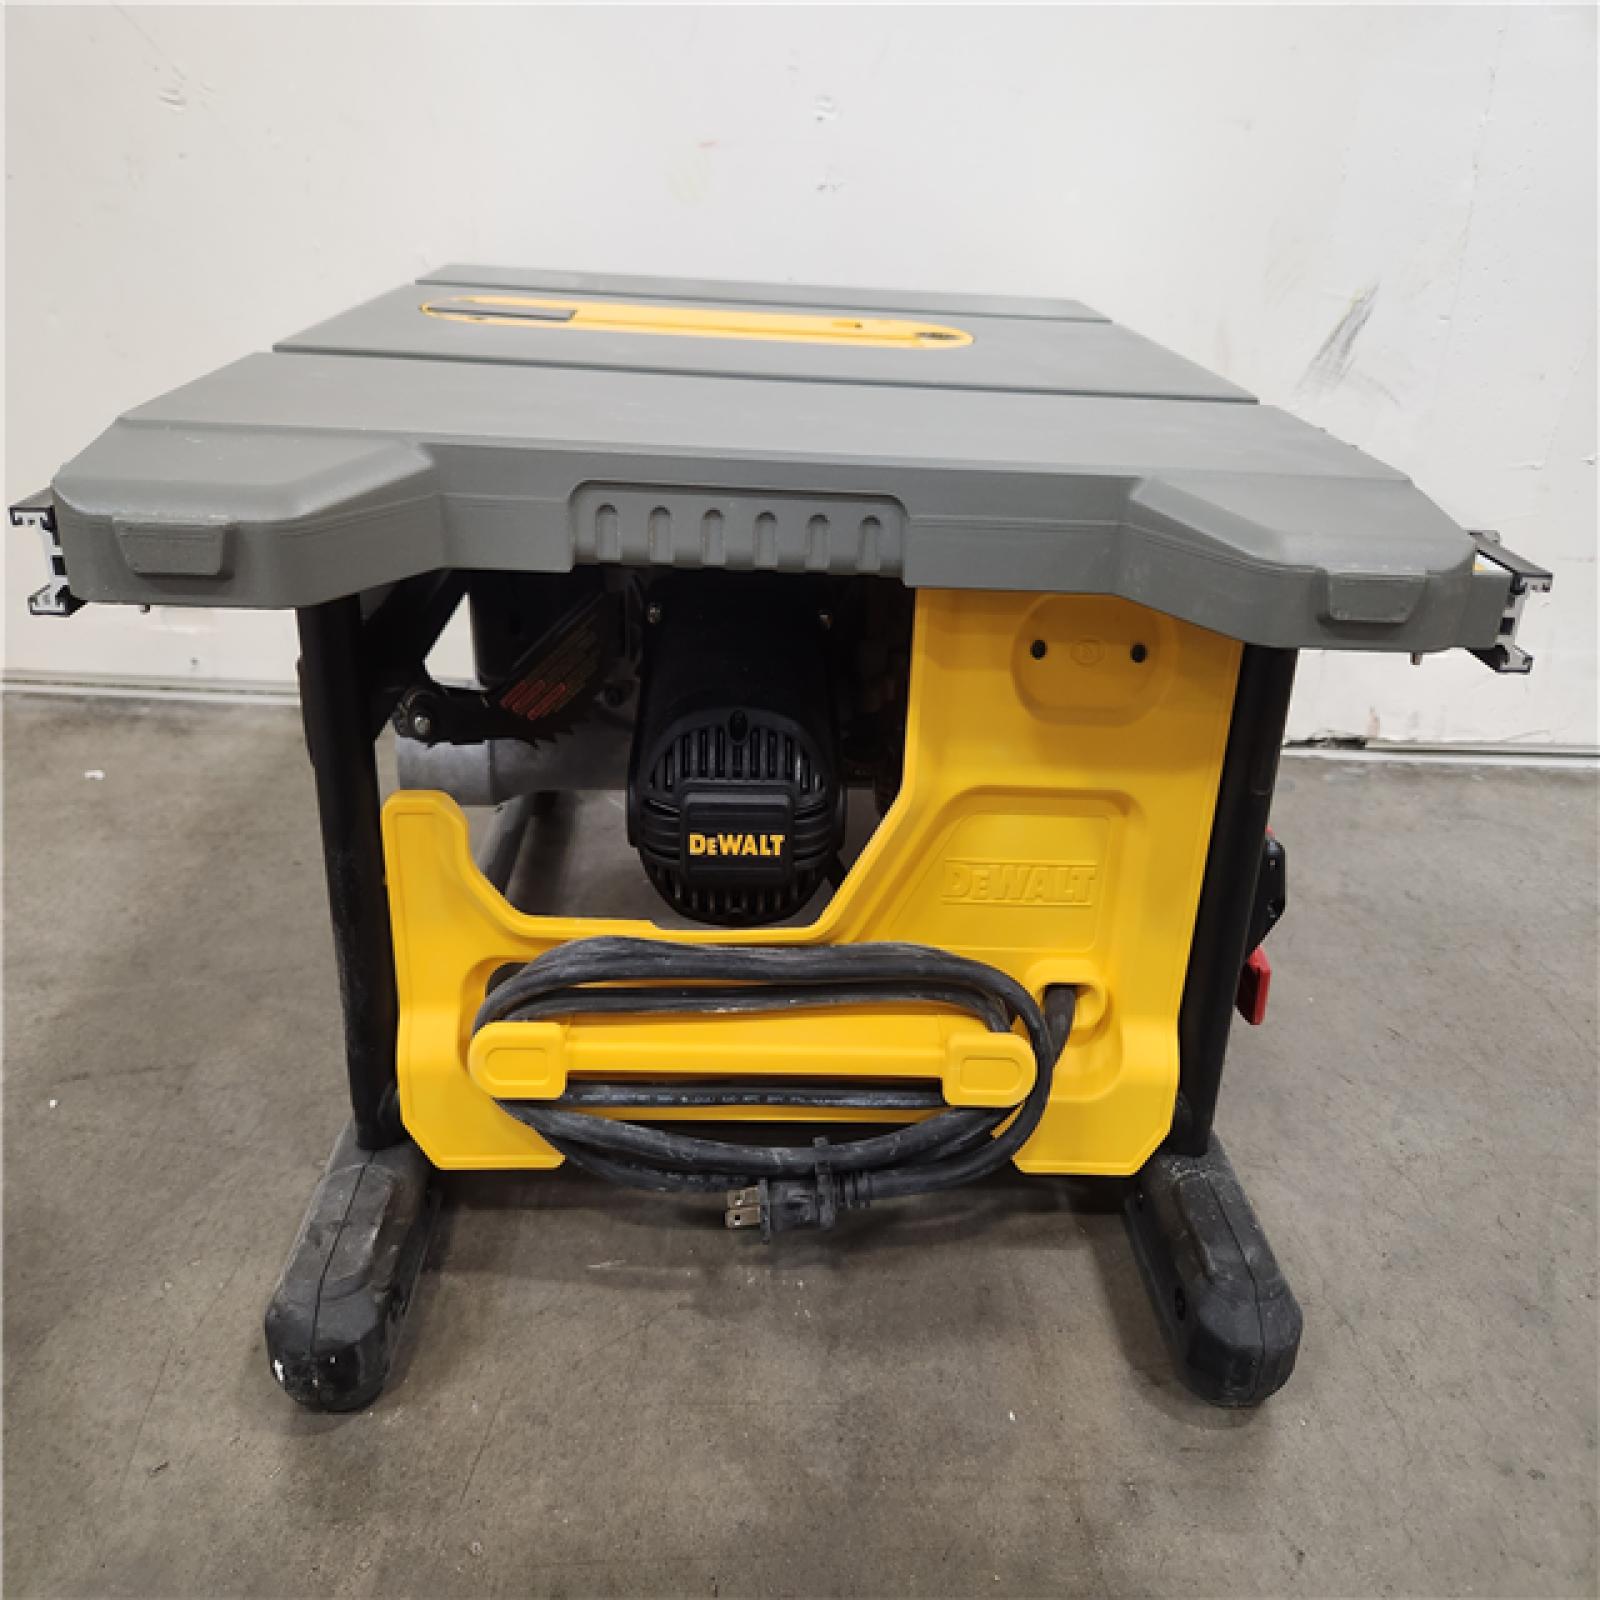 Phoenix Location LIKE NEW DEWALT 15 Amp Corded 8-1/4 in. Compact Portable Jobsite Tablesaw (Stand Not Included)